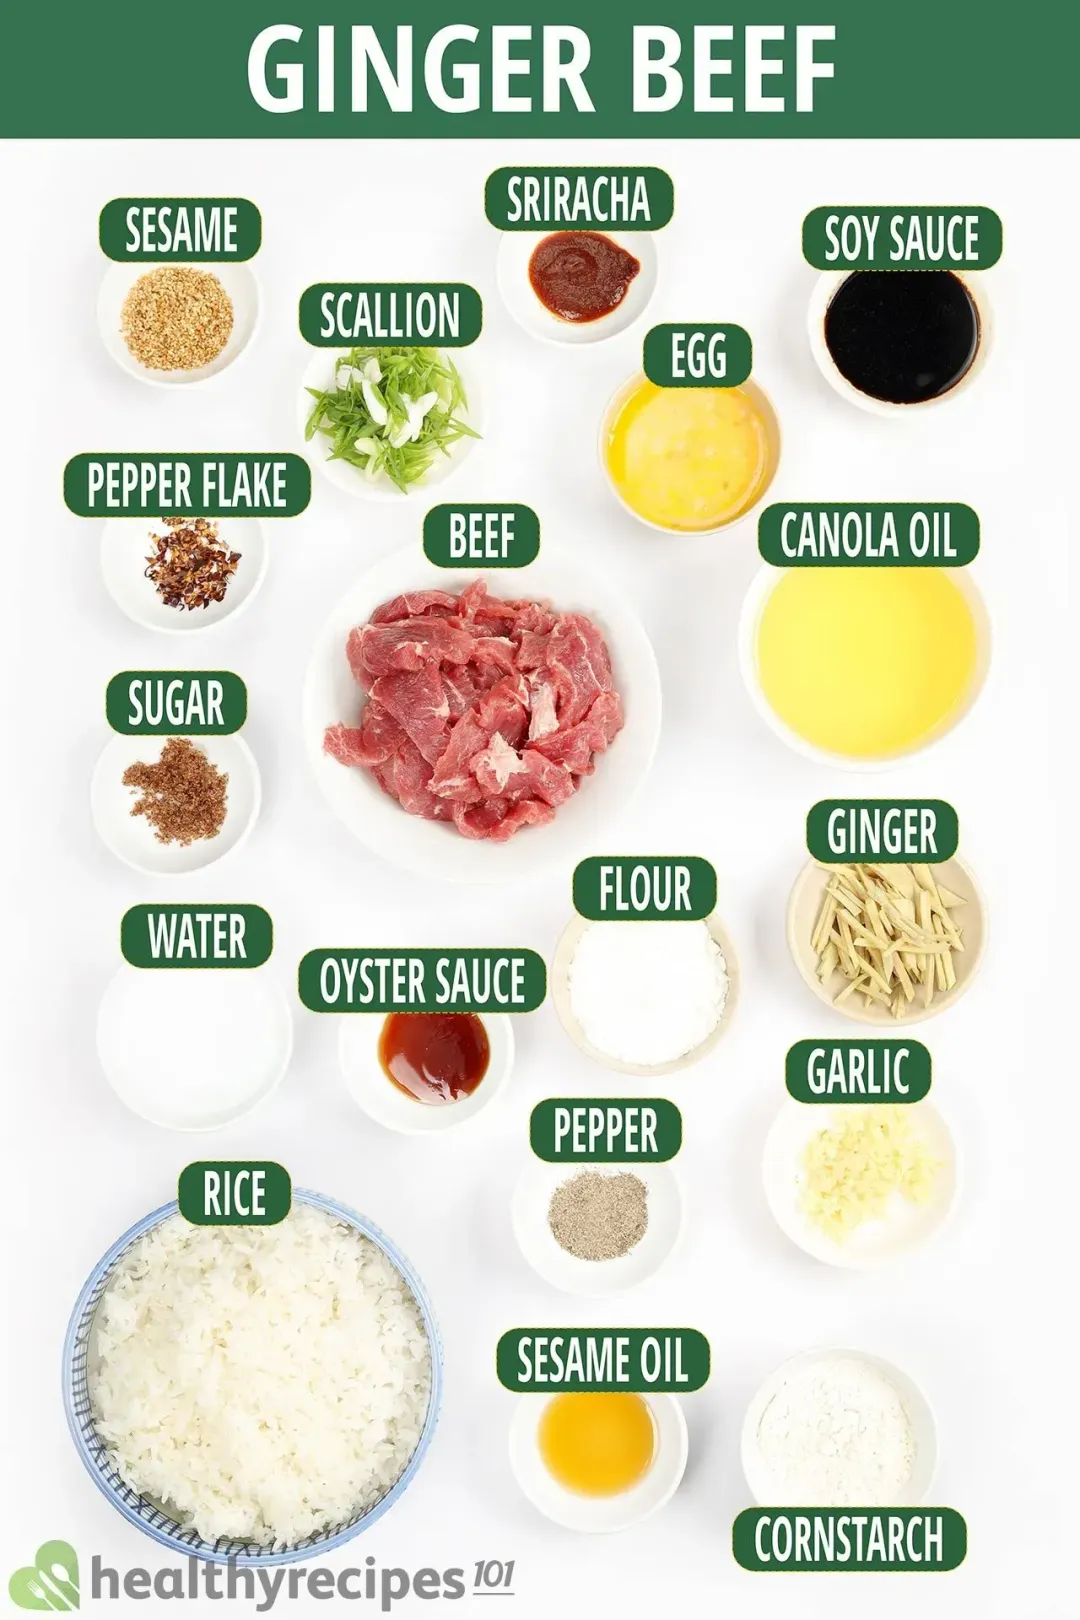 Ingredients for Ginger Beef